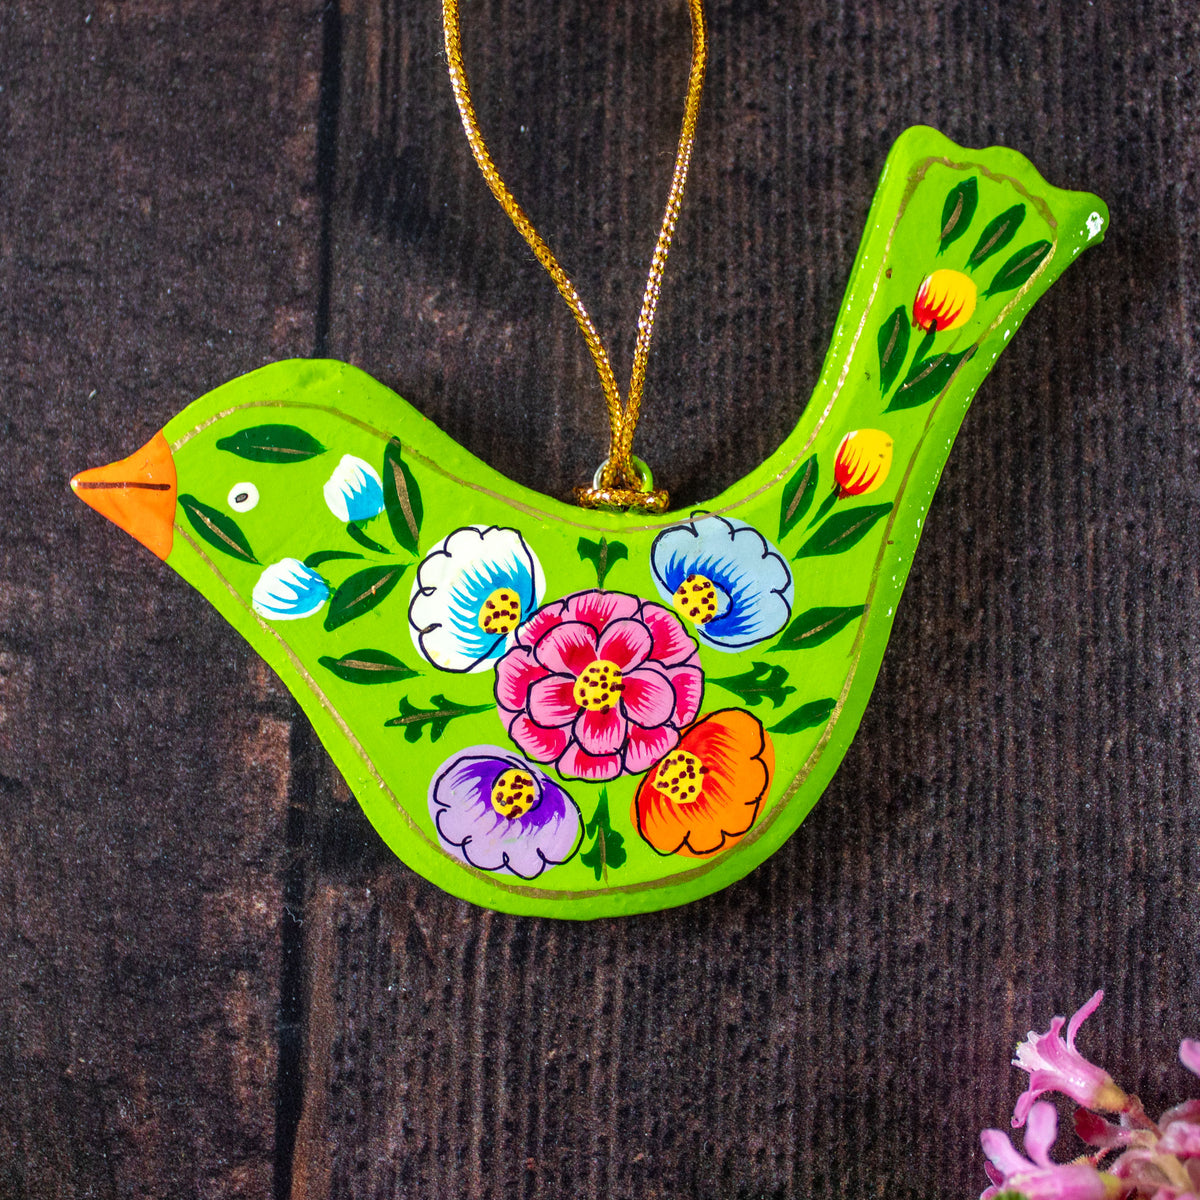 Hanging Spring Decoration - Painted Bird- Green Flowers